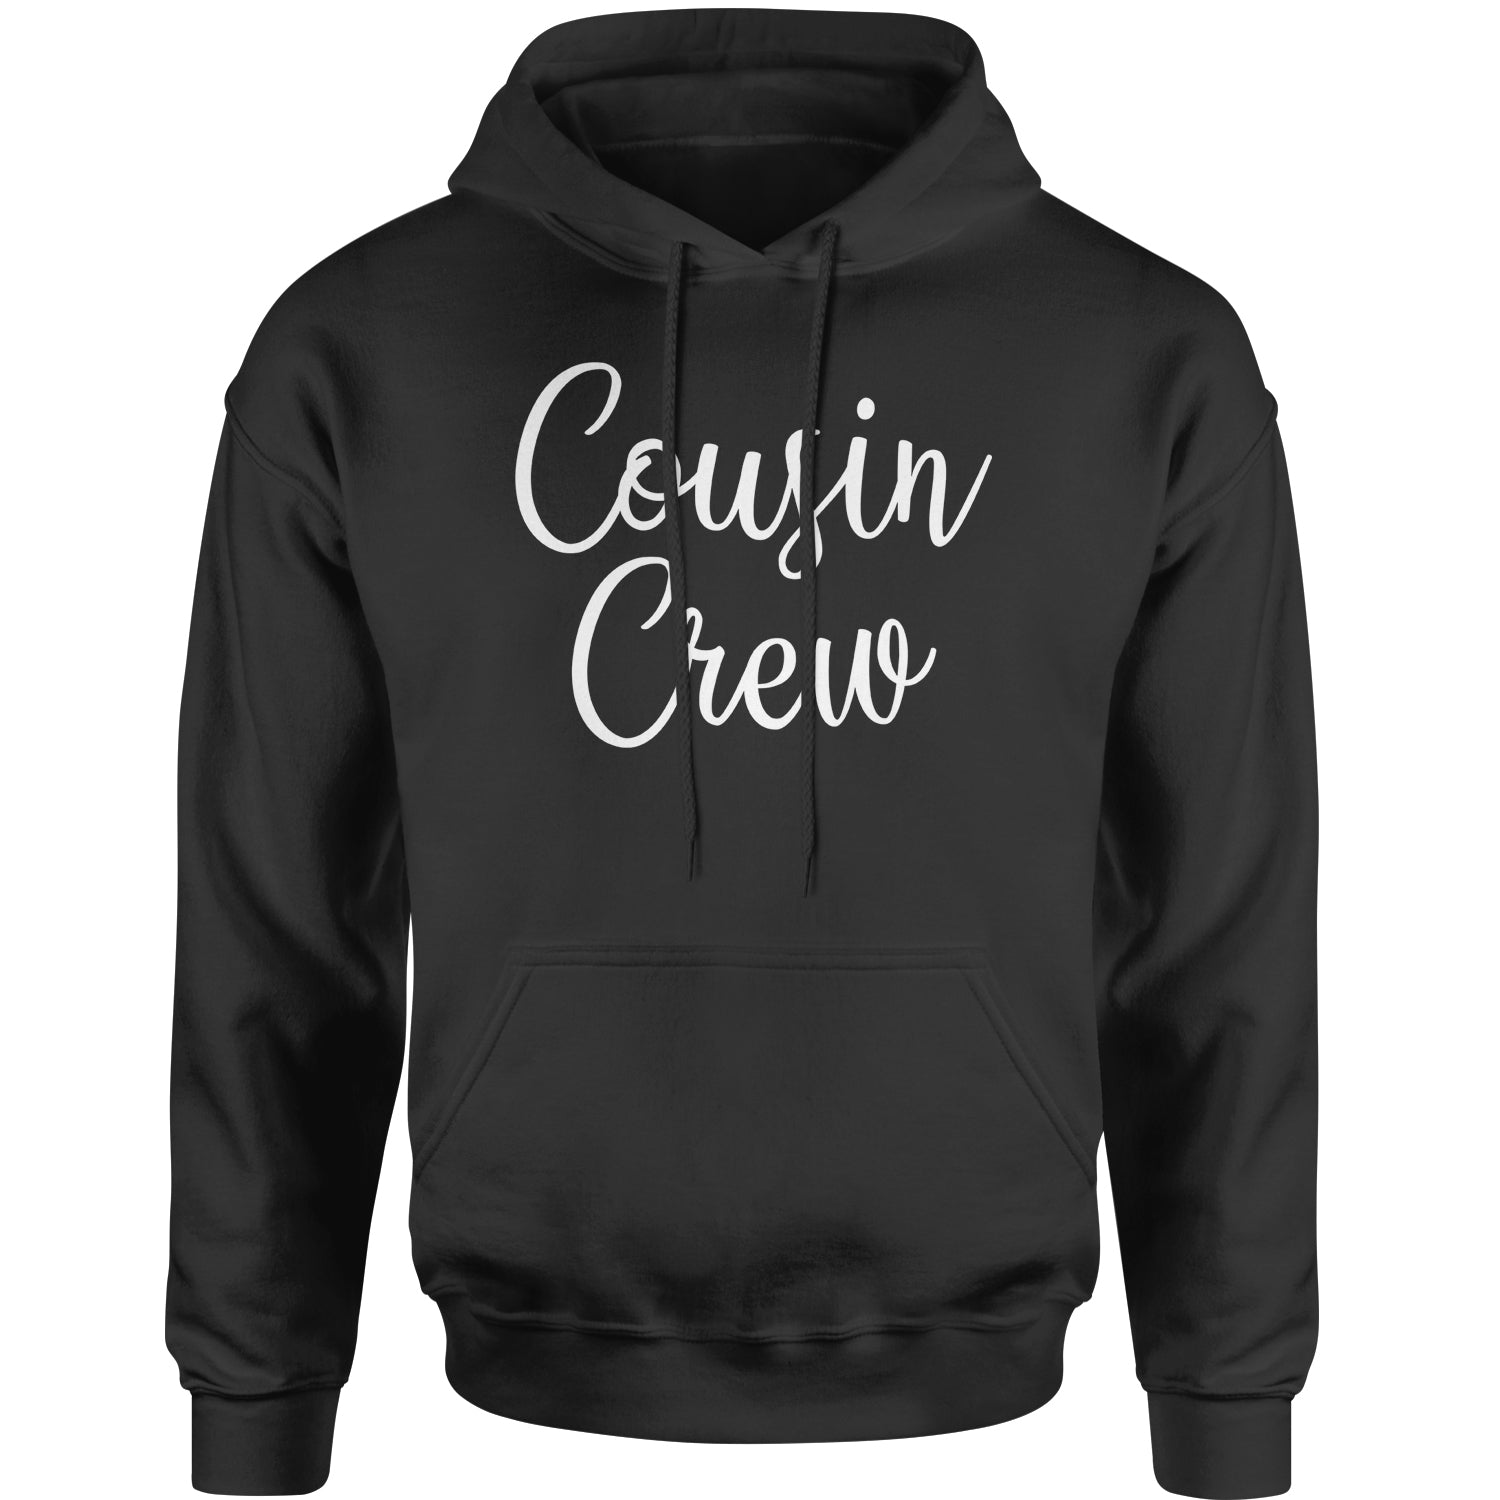 Cousin Crew Fun Family Outfit Adult Hoodie Sweatshirt barbecue, bbq, cook, family, out, reunion by Expression Tees